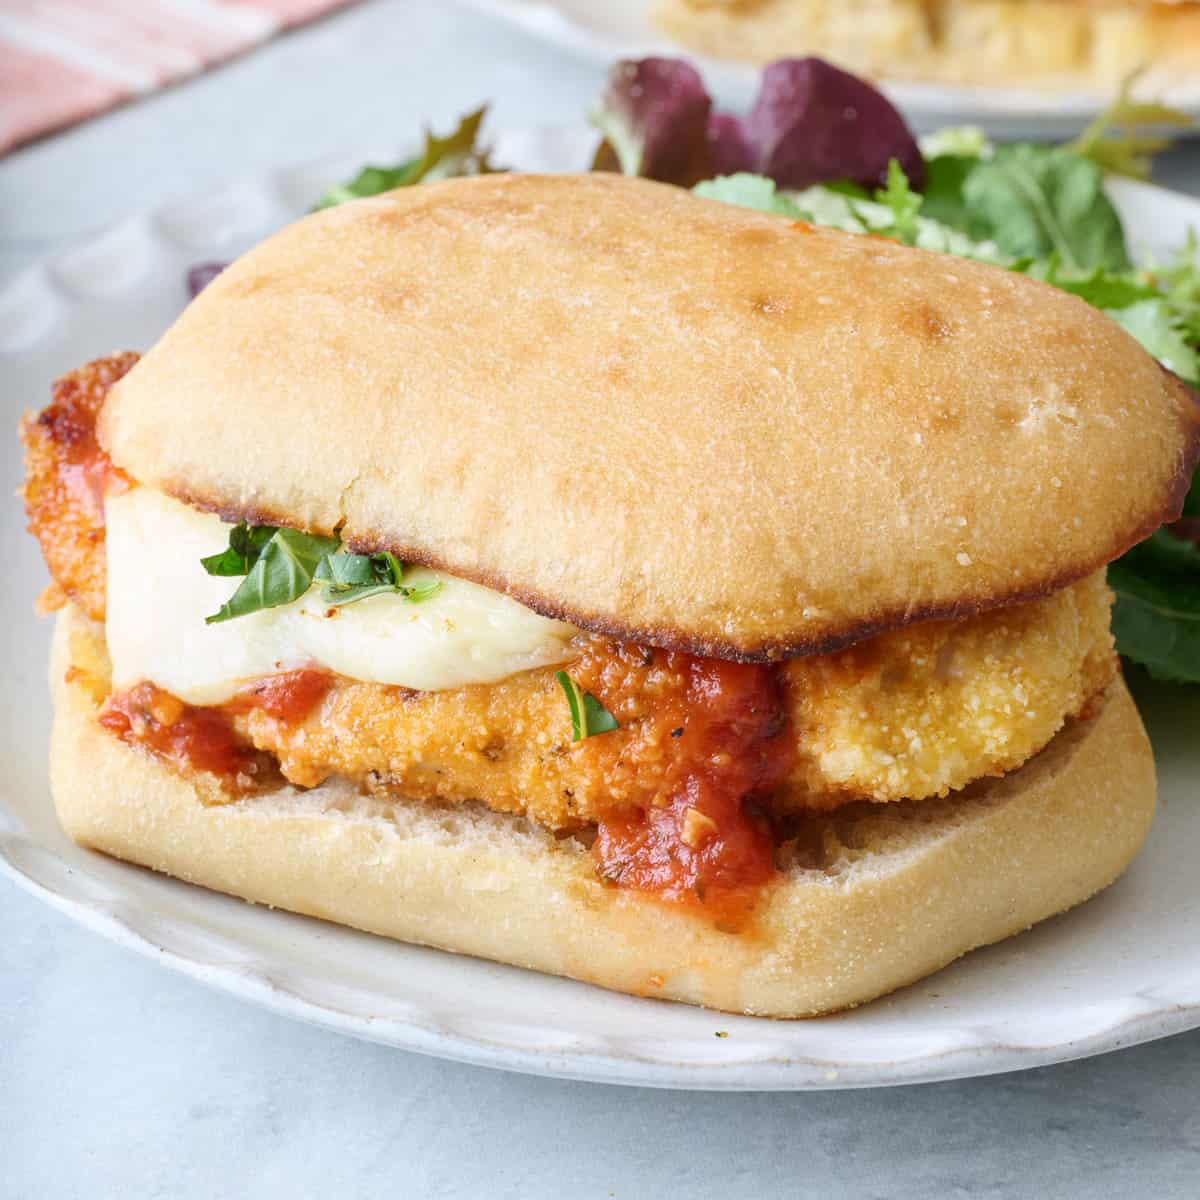 Closeup of a chicken parm sandwich on a small white plate with a side salad.